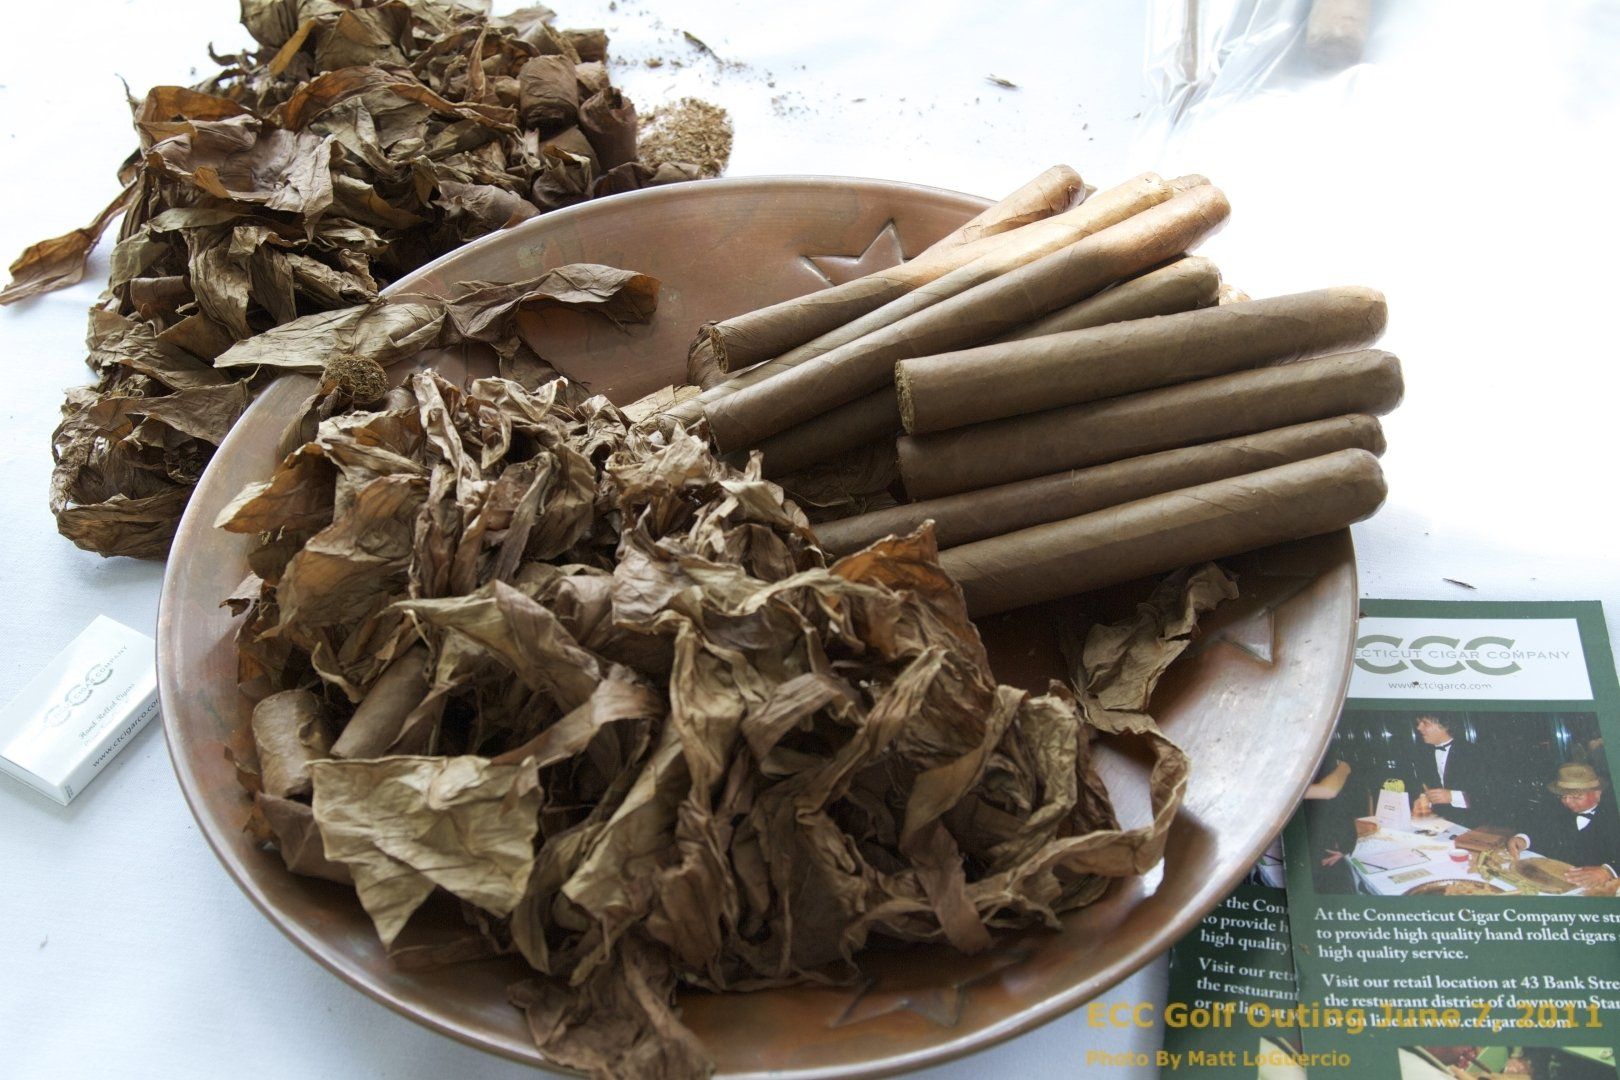 a plate of tobacco leaves and cigarettes on a table